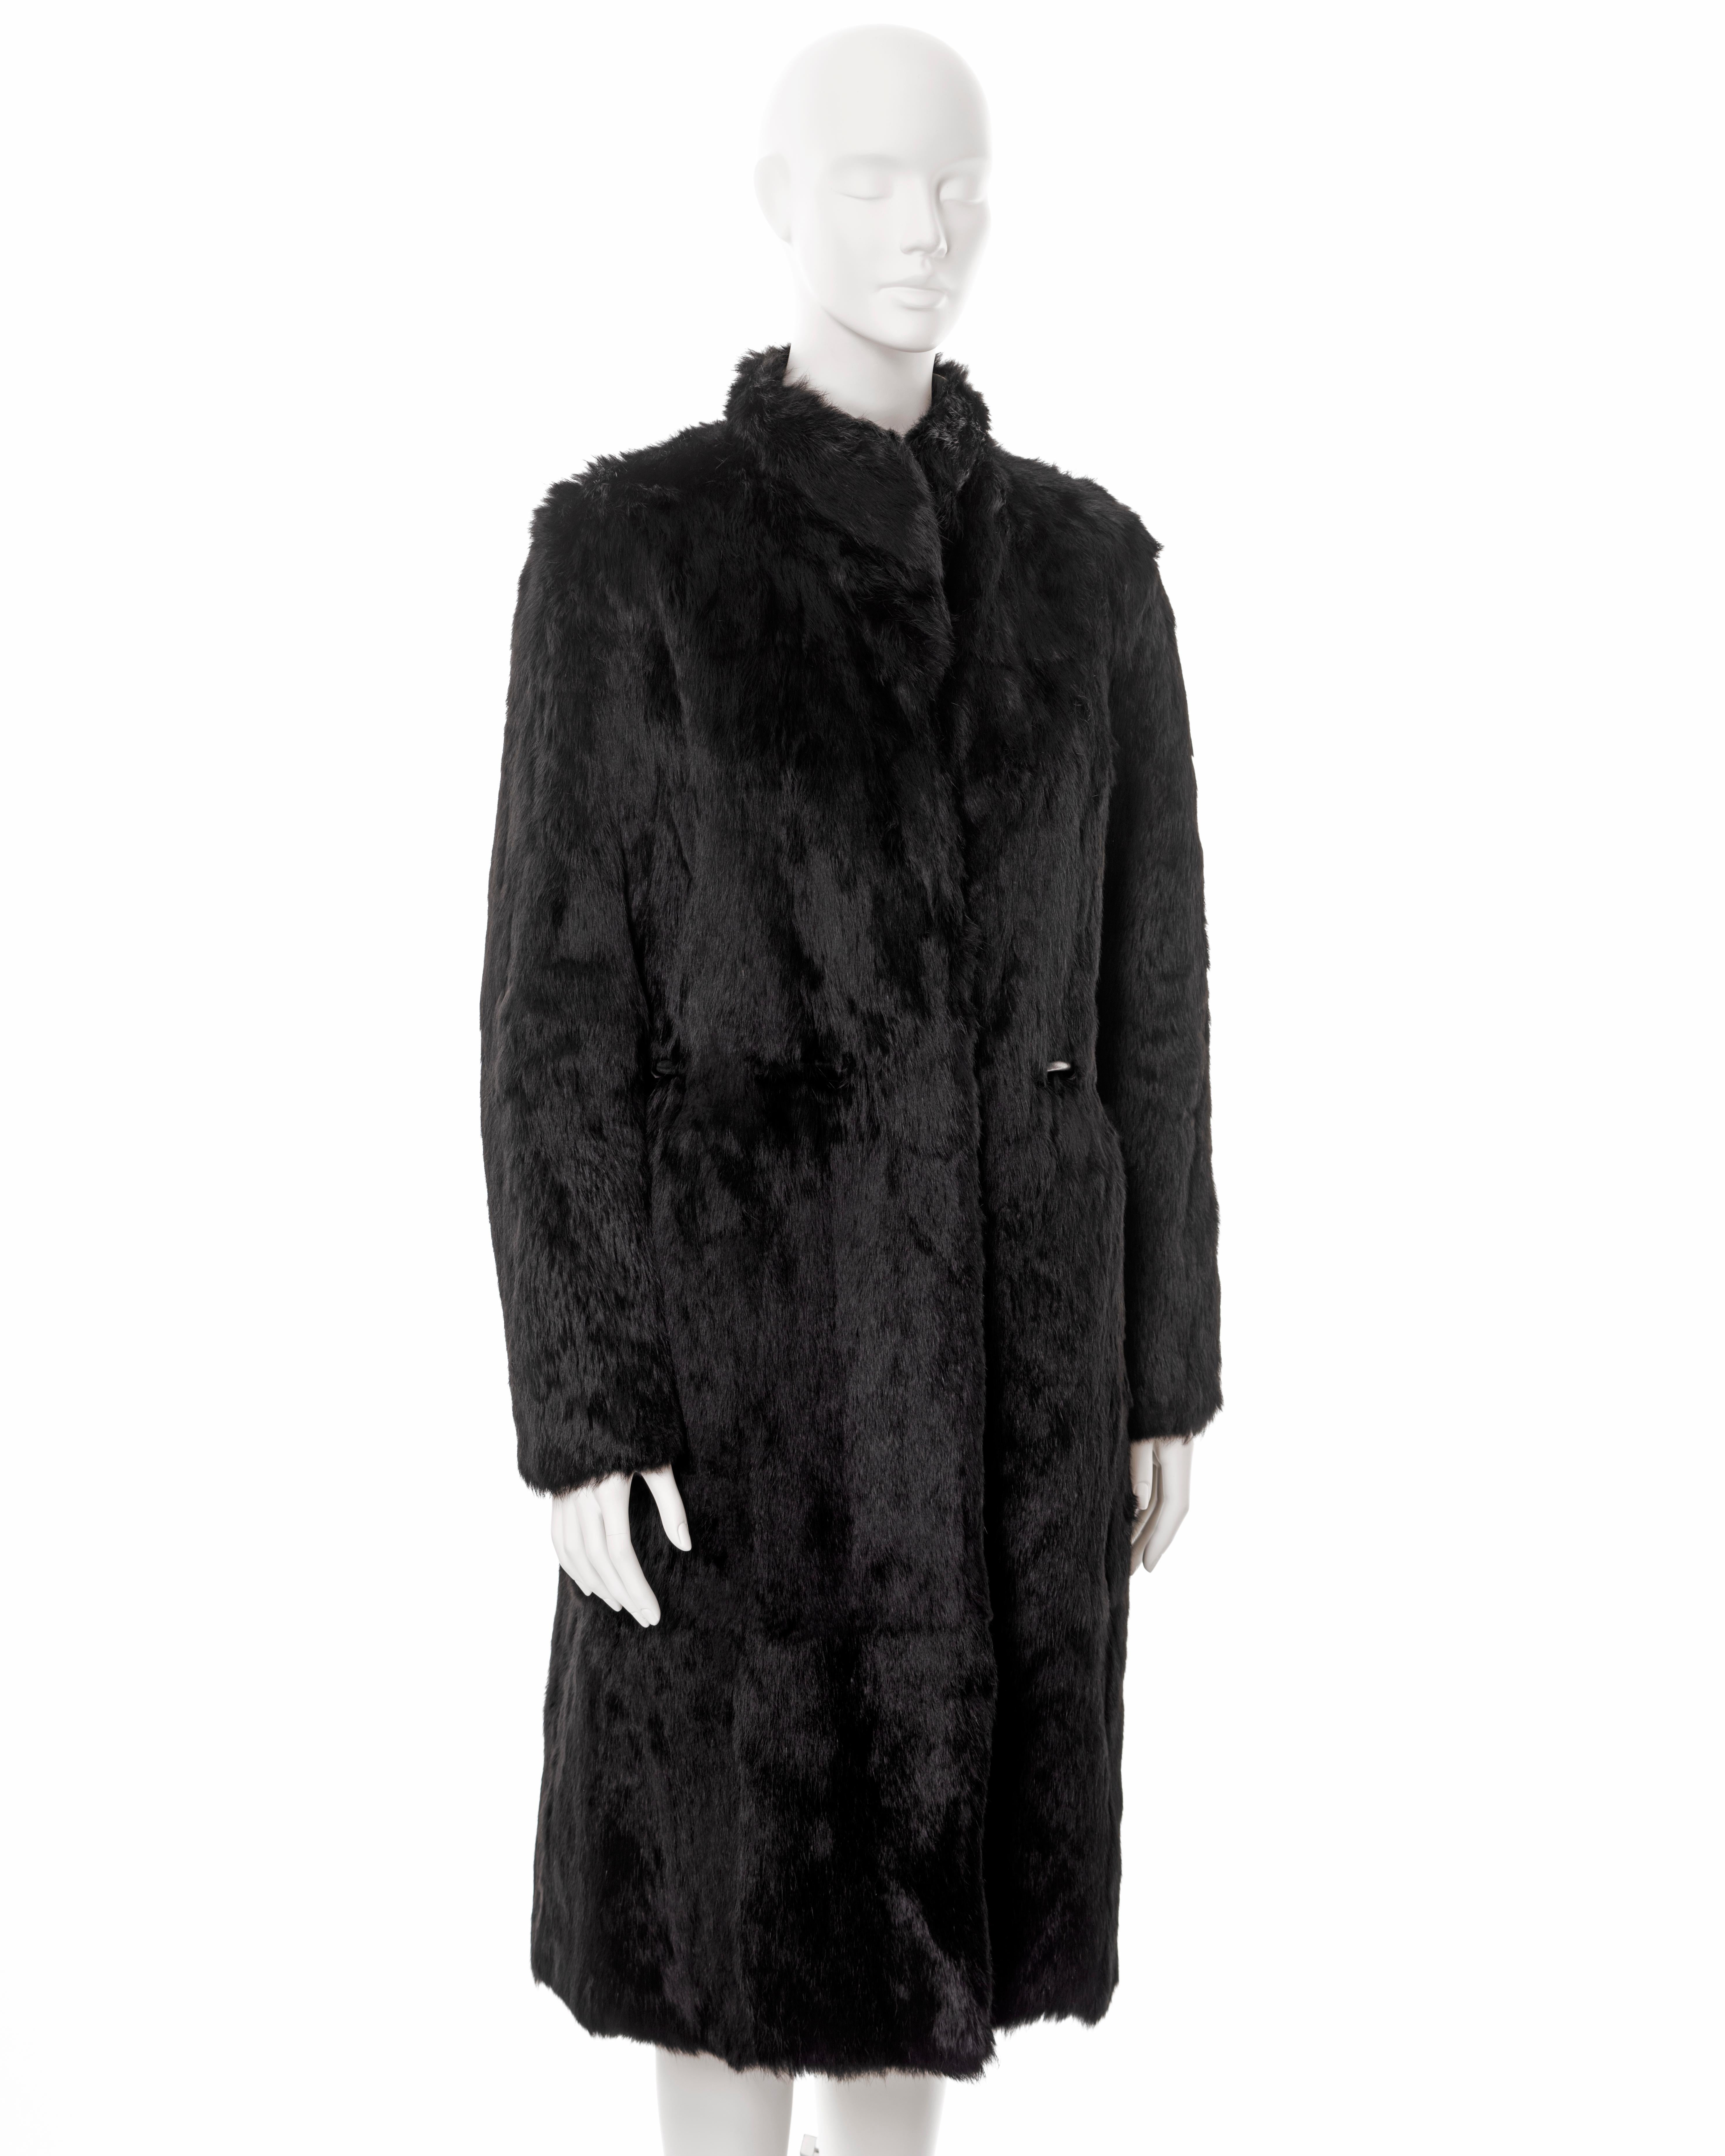 Gucci by Tom Ford reversible green and black fur coat, fw 1999 For Sale 13